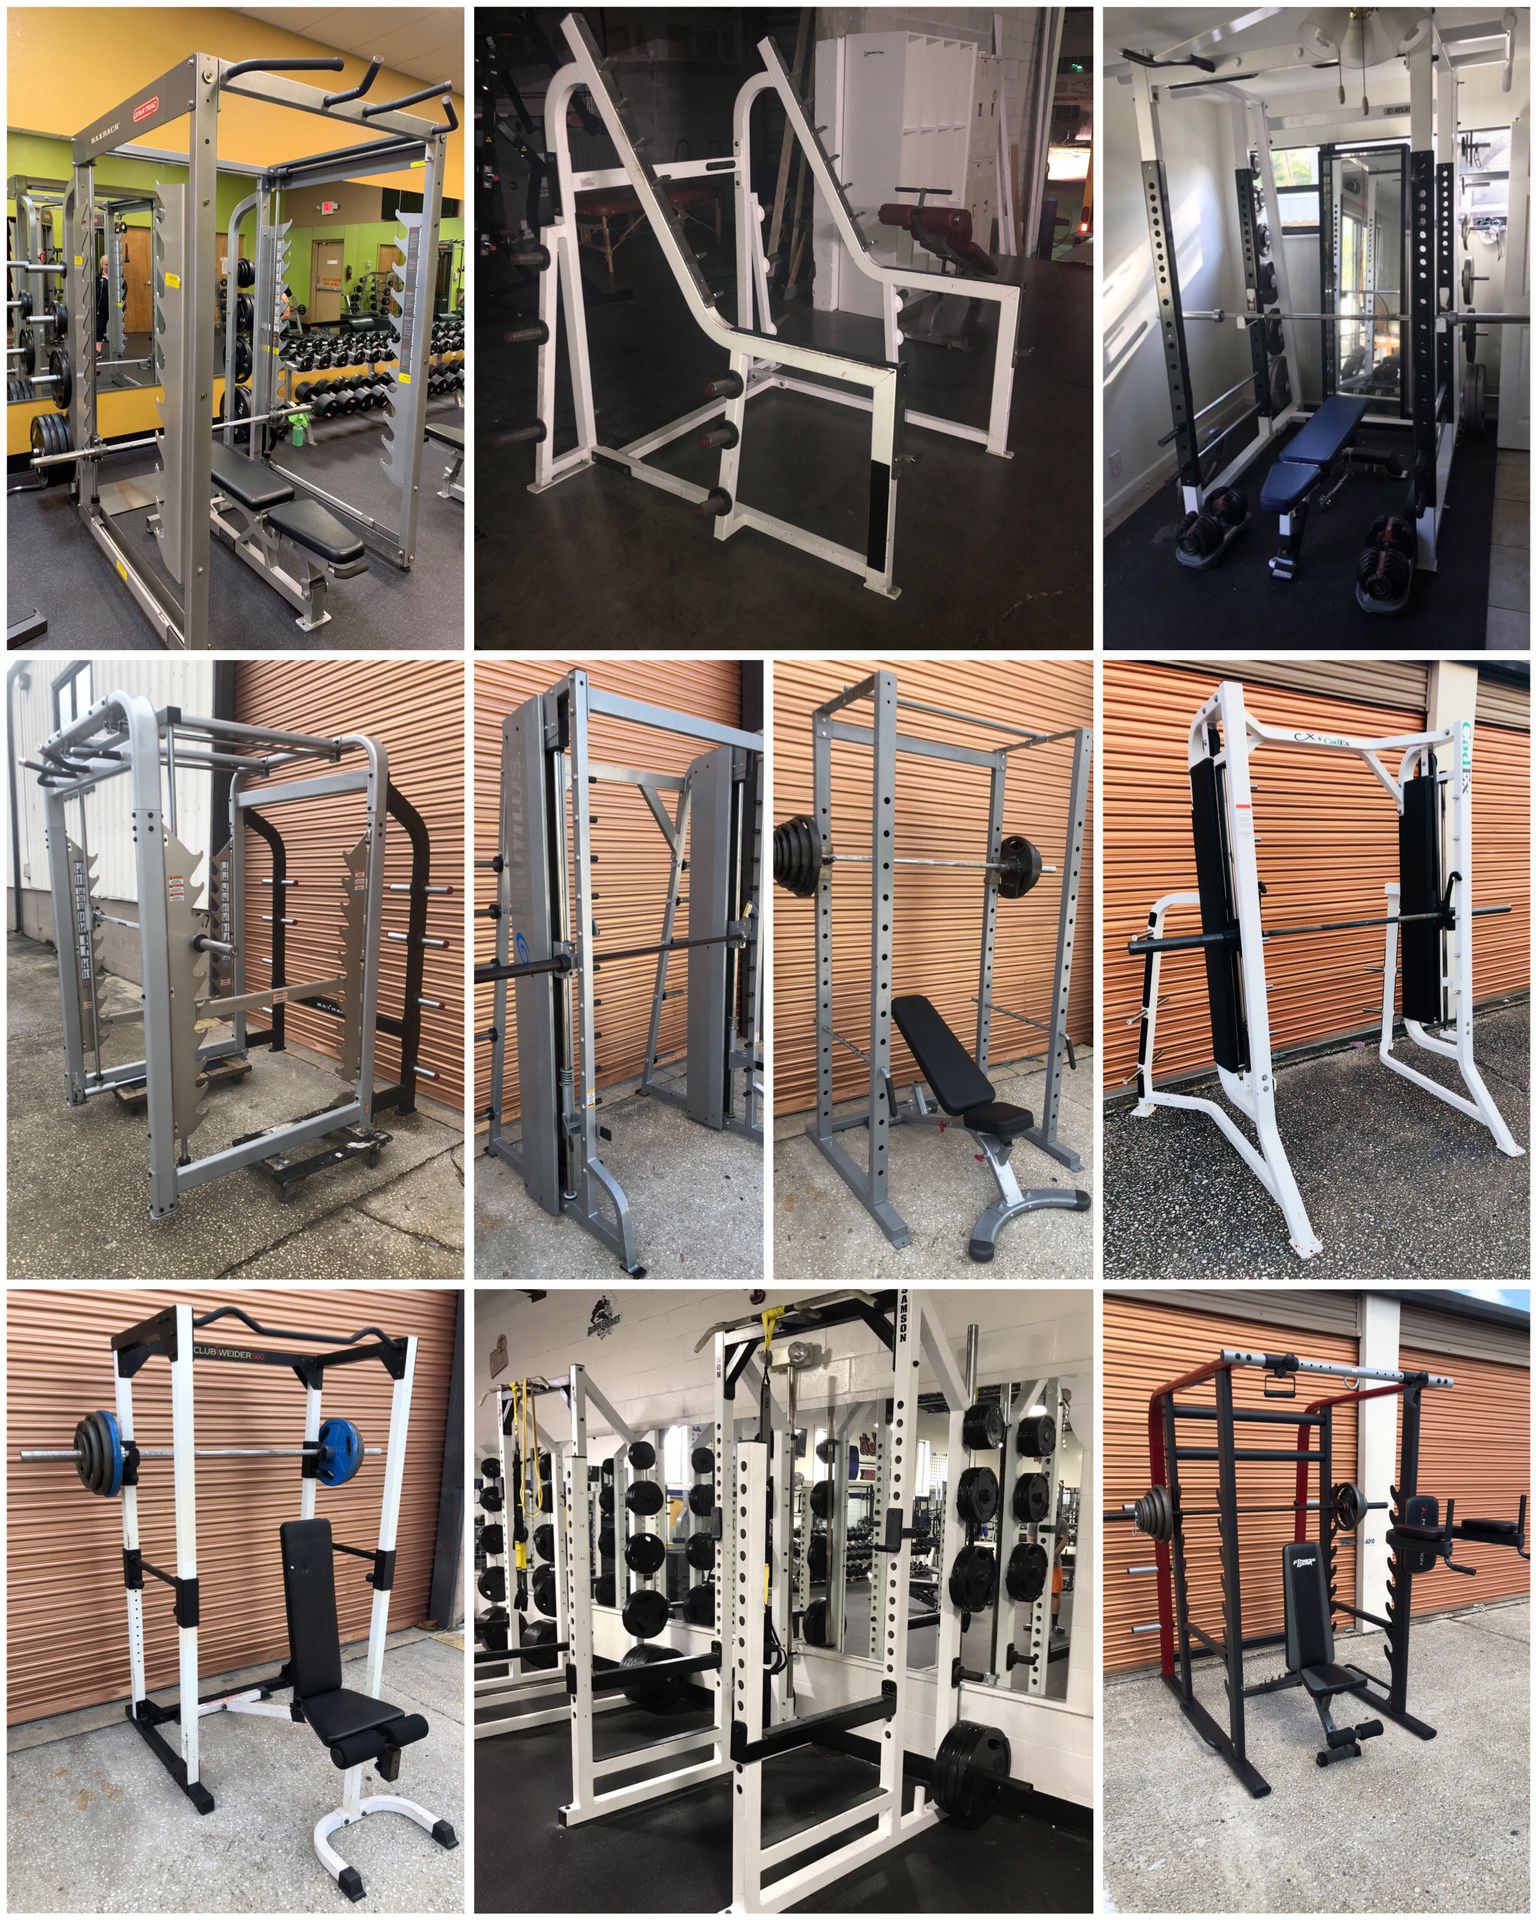 Weight Benches, Squat Racks, Smith Machines, Olympic Plates, Dumbbells, Leg Presses